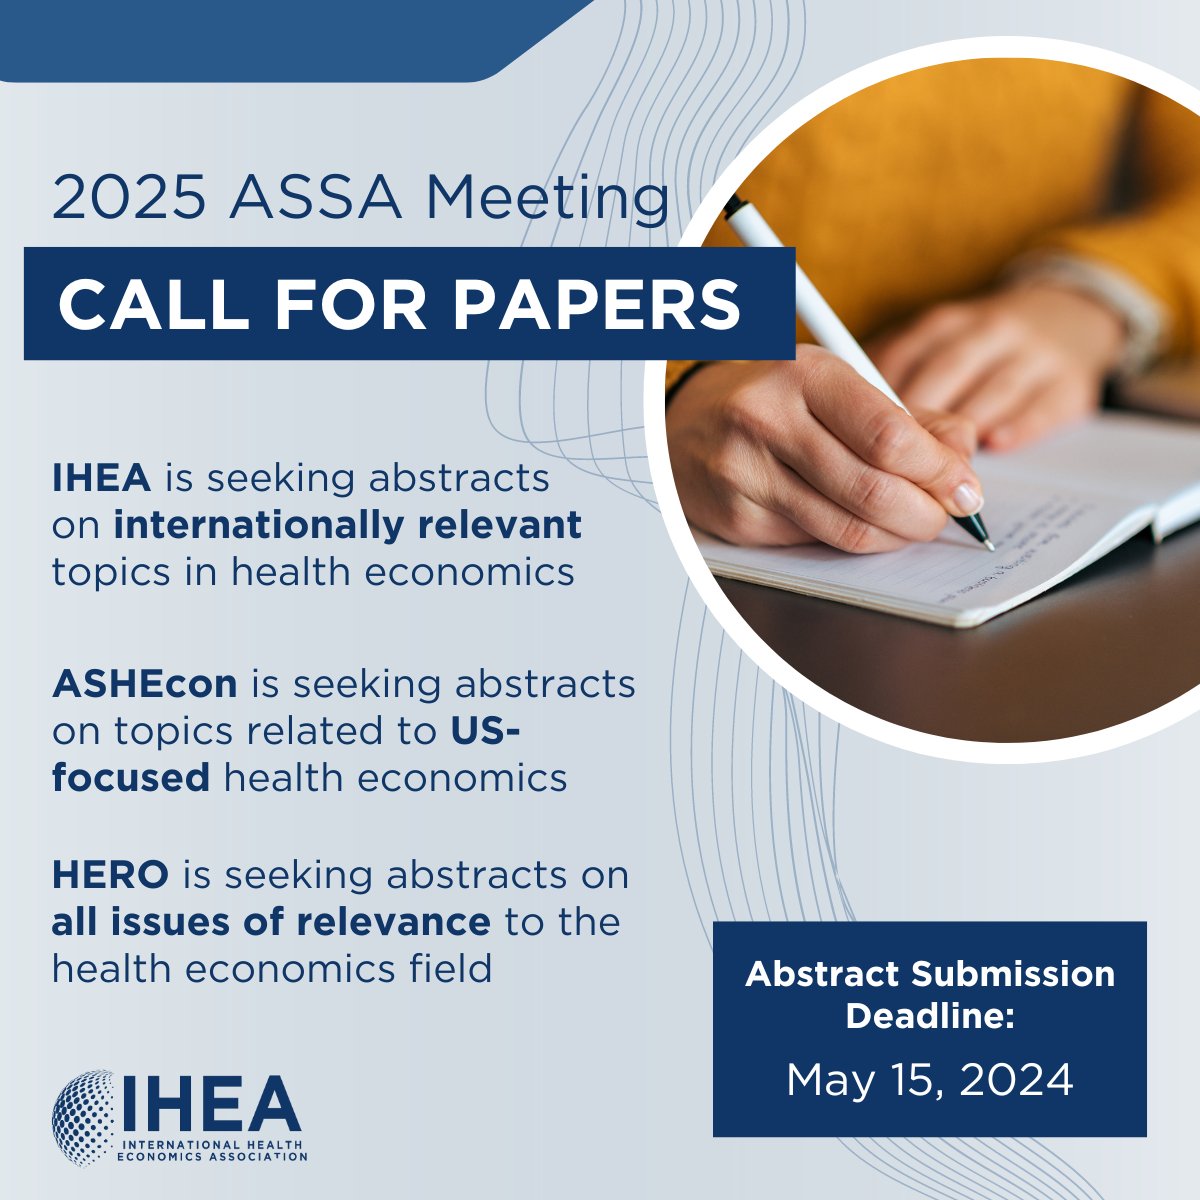 Abstract submissions are now open for 1 ASHEcon-organized session, 5 HERO-organized sessions, and 2 IHEA-organized sessions, taking place next January 3-5, 2025 at the 2025 ASSA Meeting in San Francisco. For more info and to submit, please visit: cognitoforms.com/ASHEcon1/_2025…